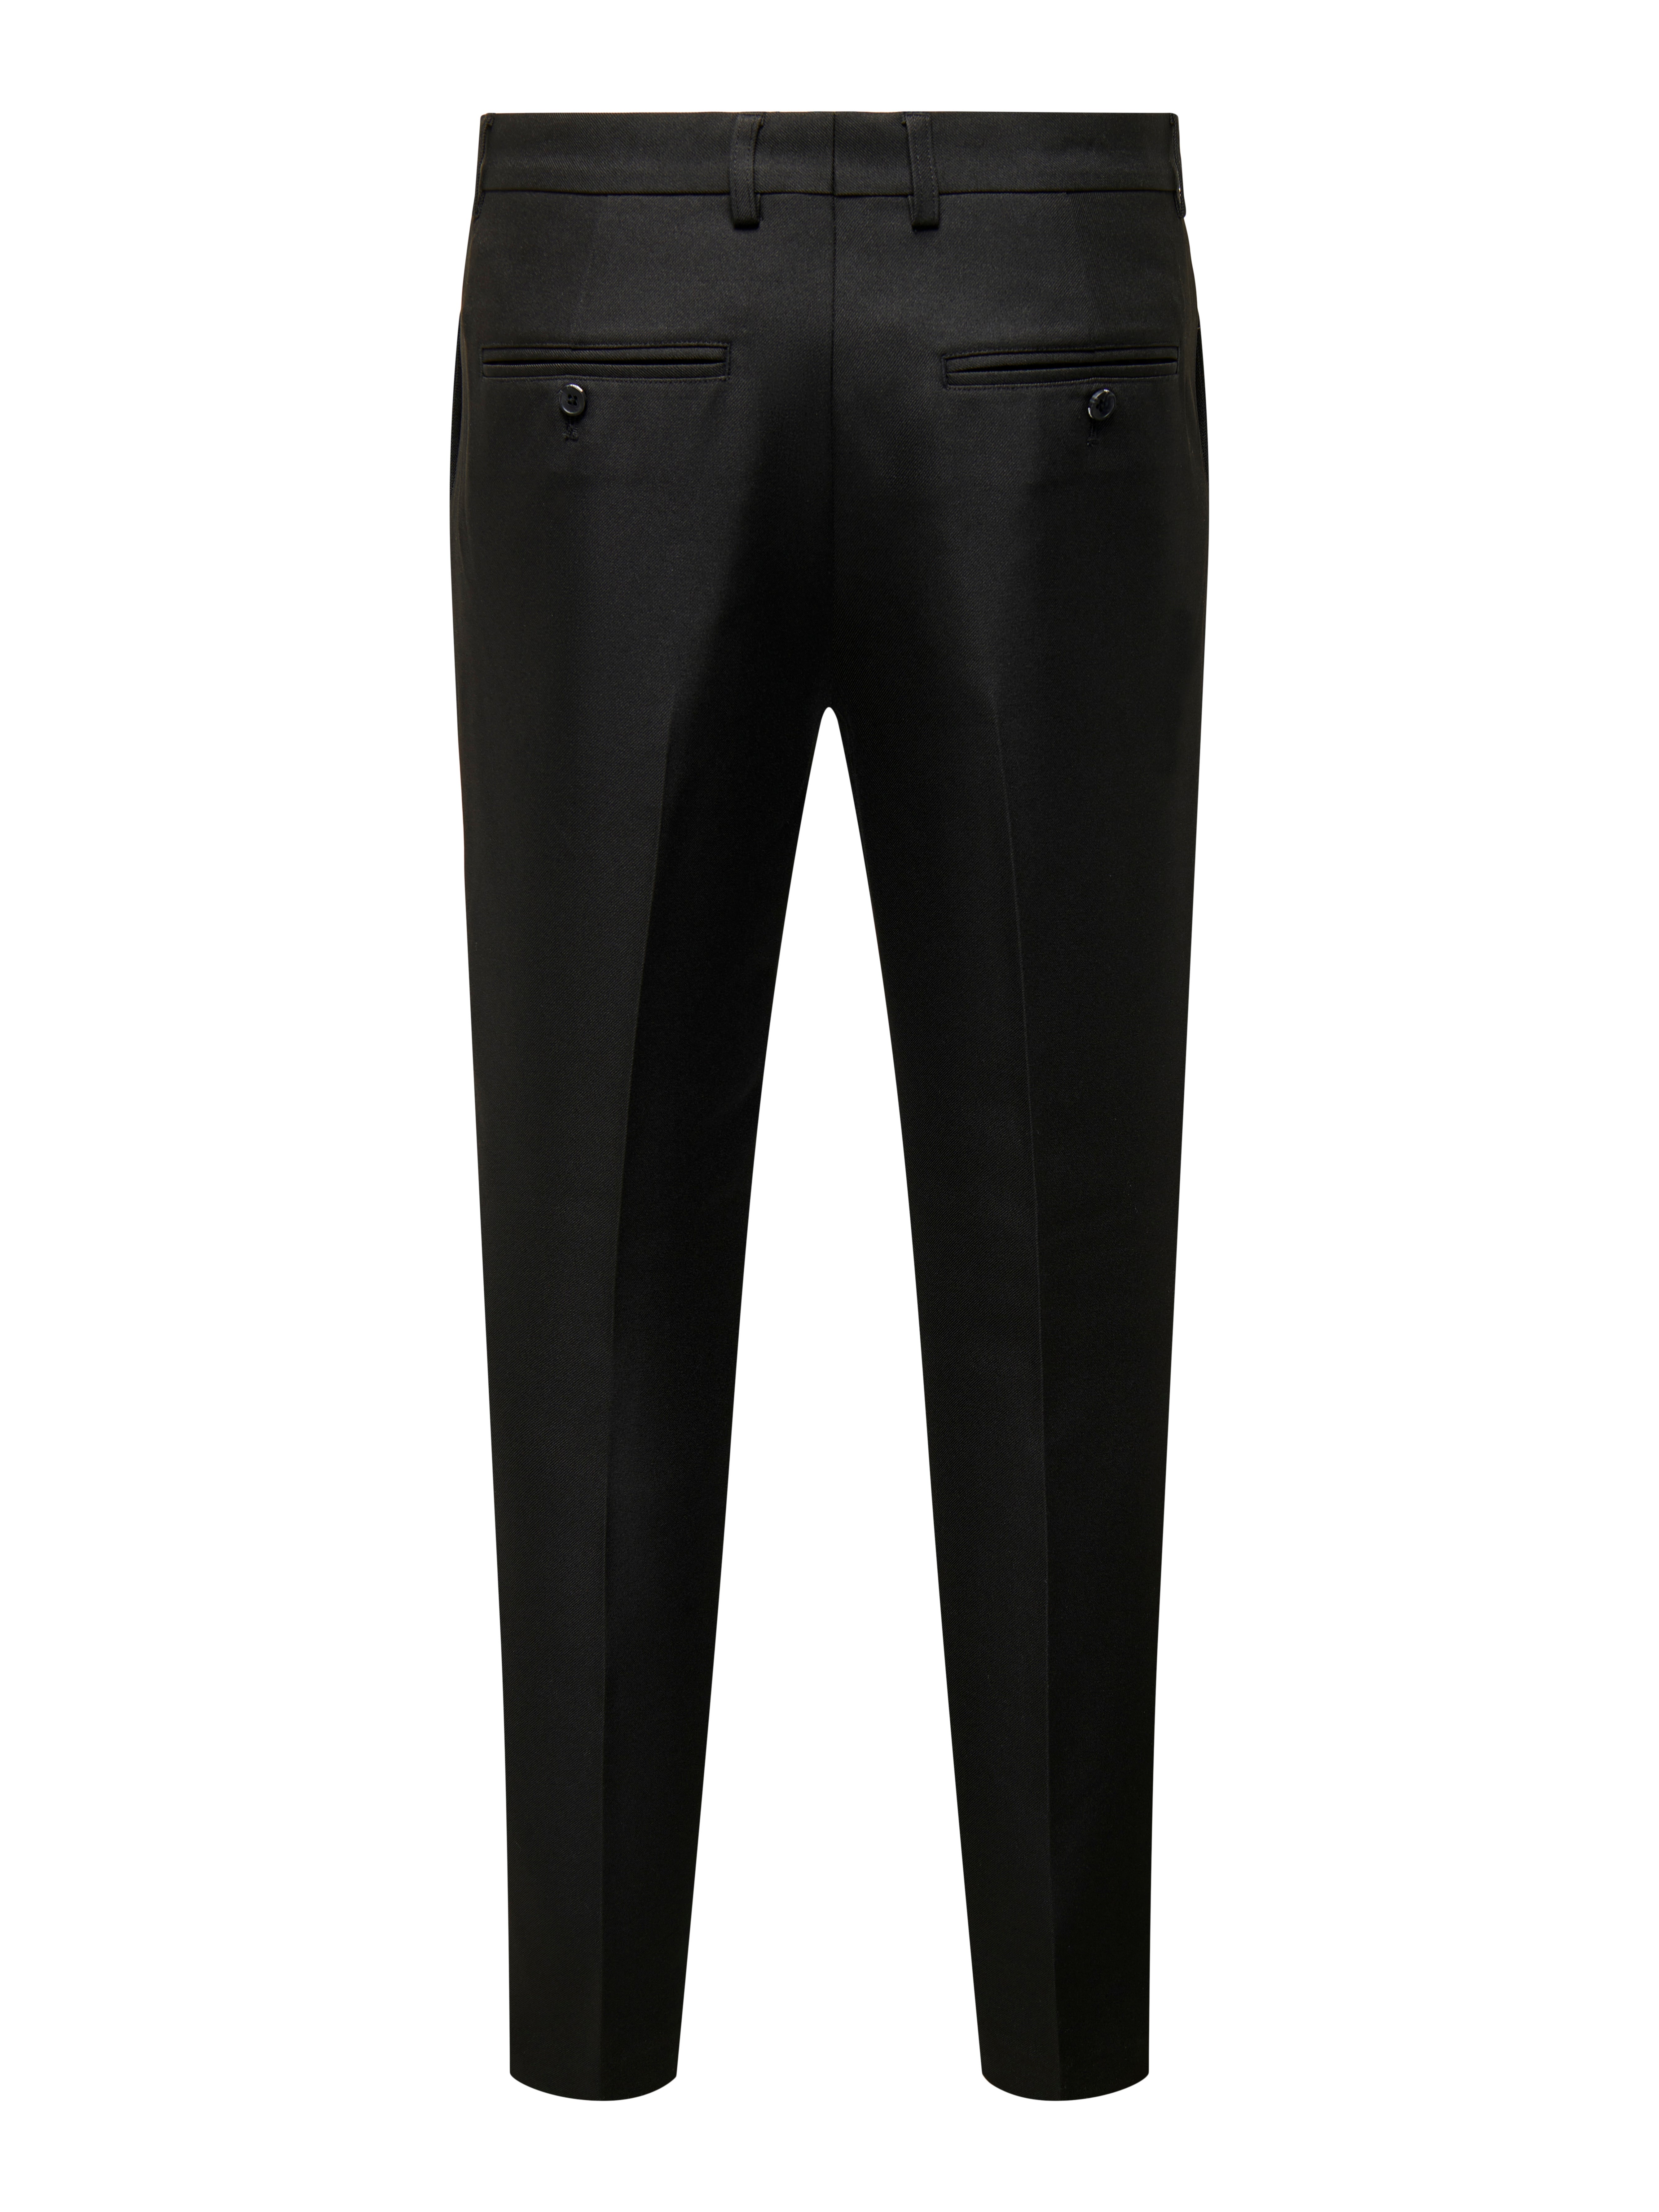 Buy Black High Rise Flared Shimmer Pants Online In India.